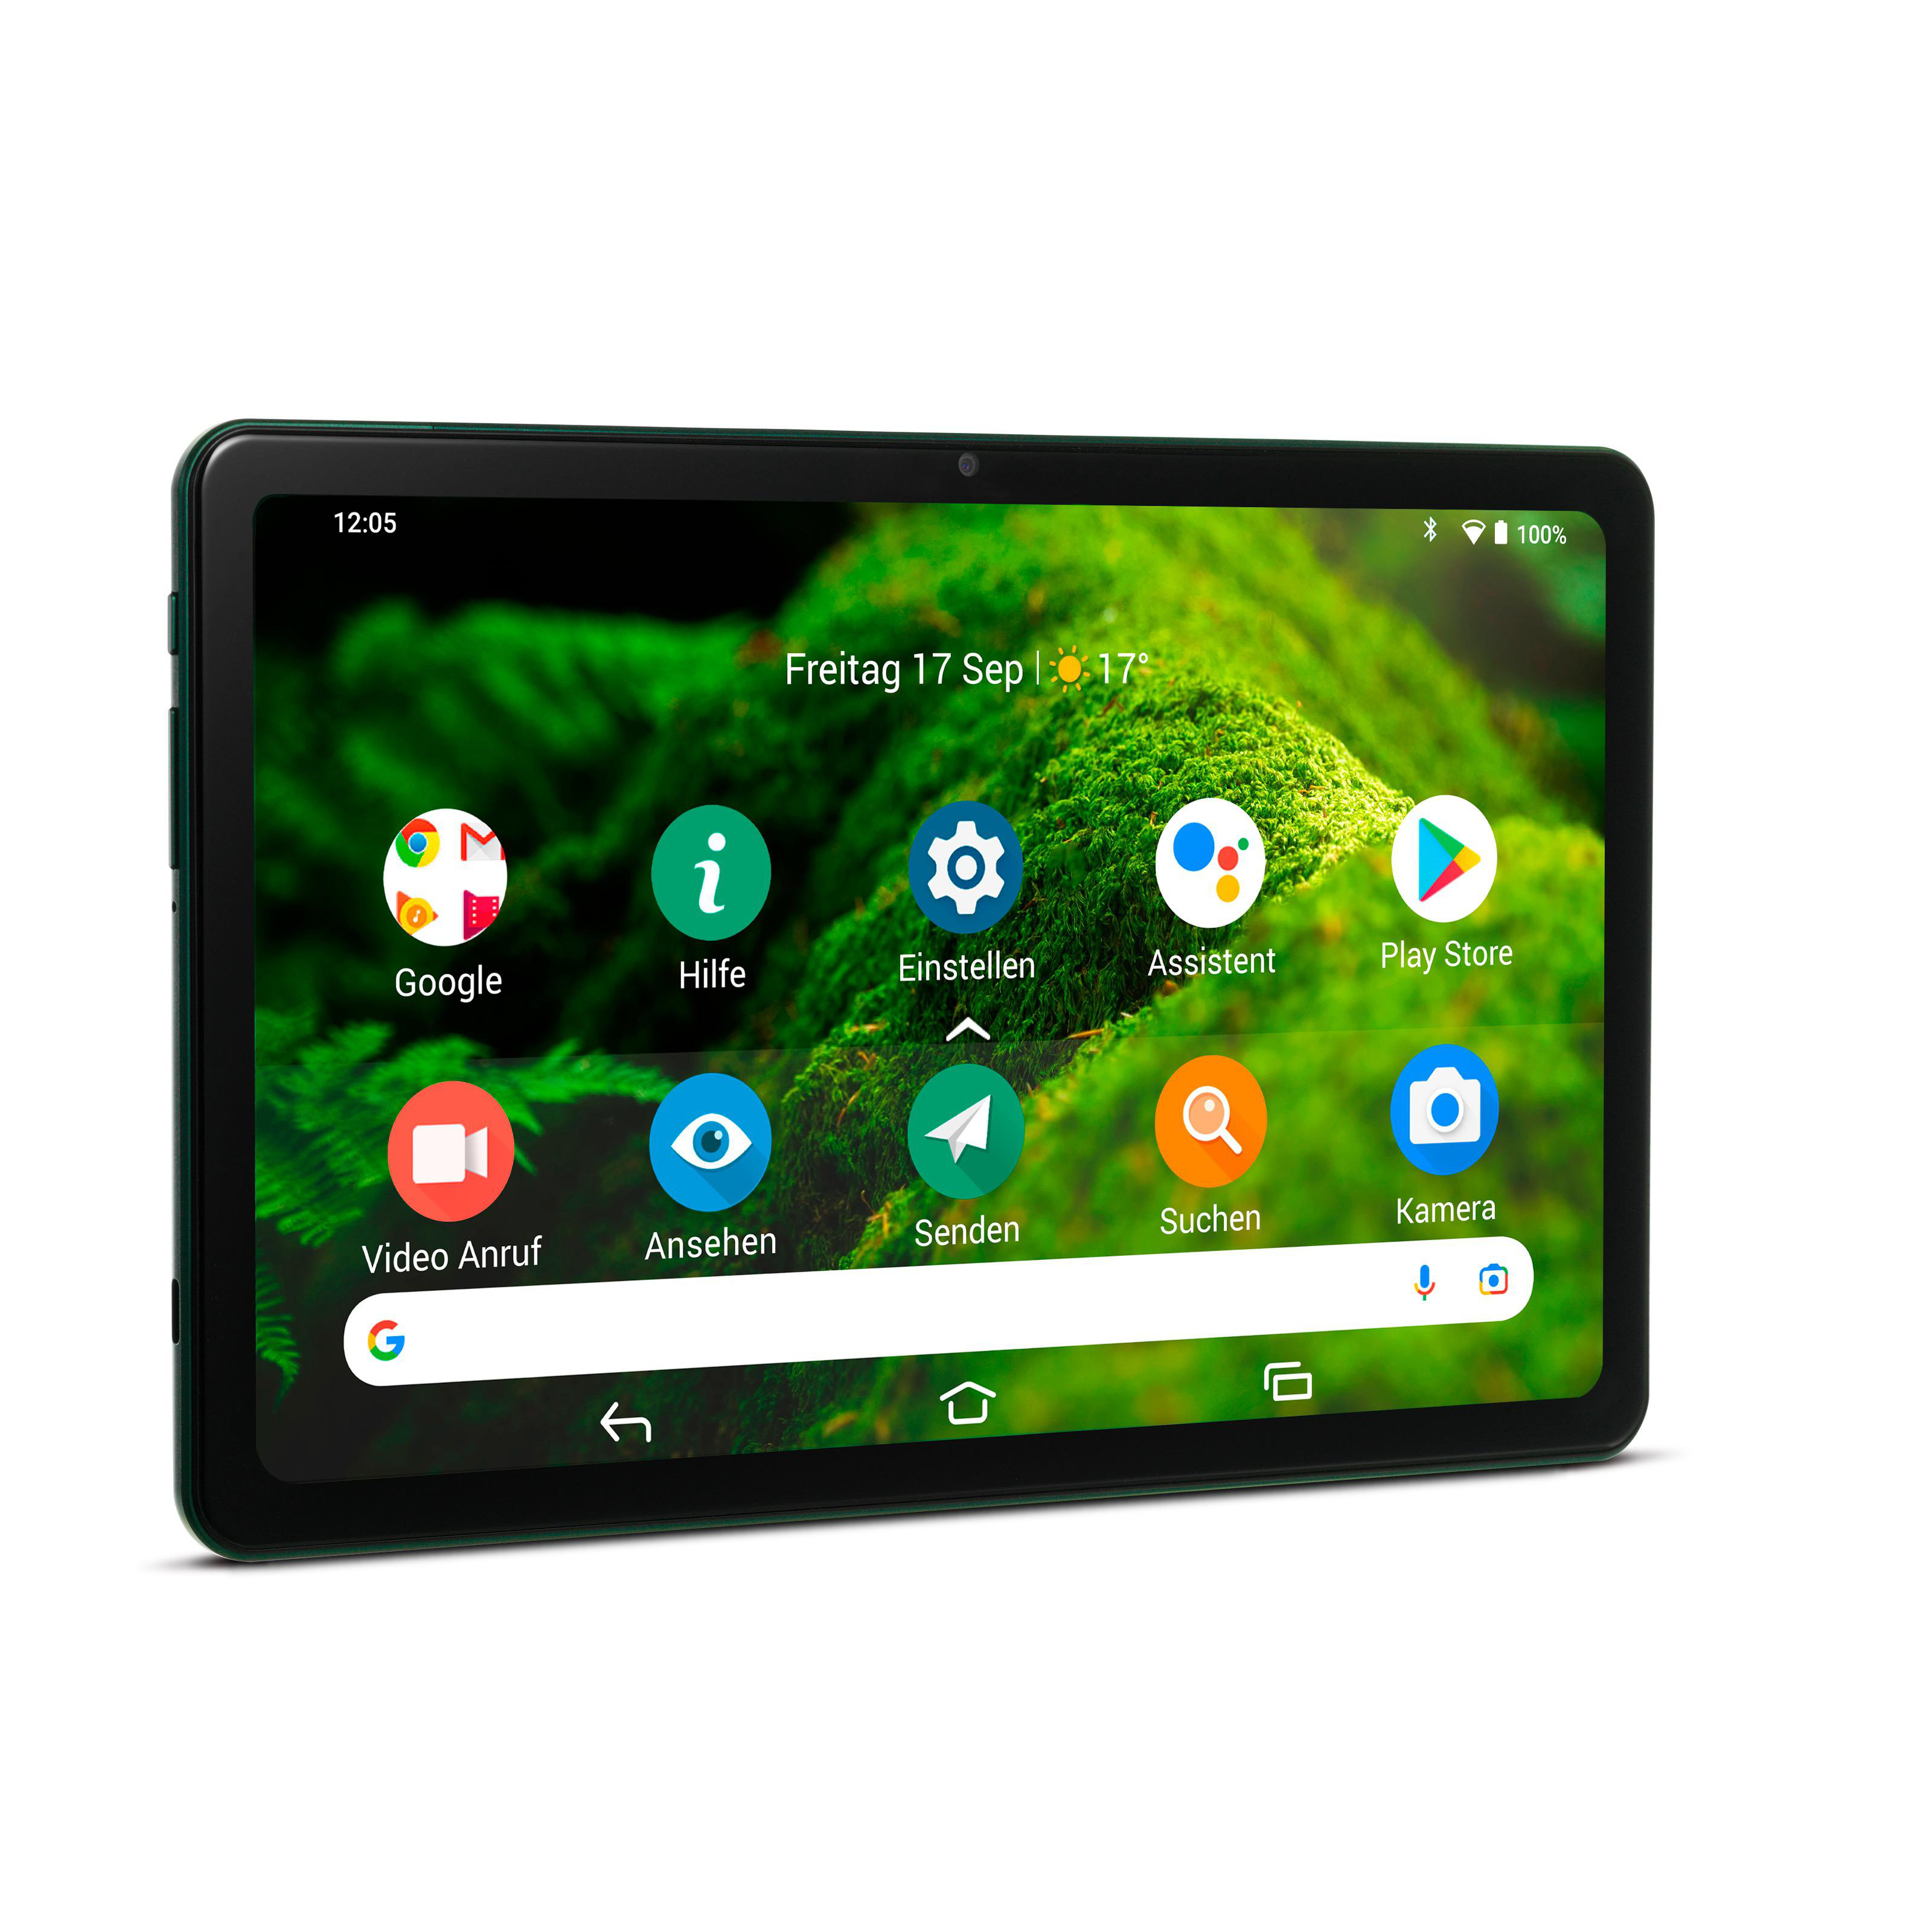 DORO Tablet, Forest 32 GB, Tablet, Zoll, 10,4